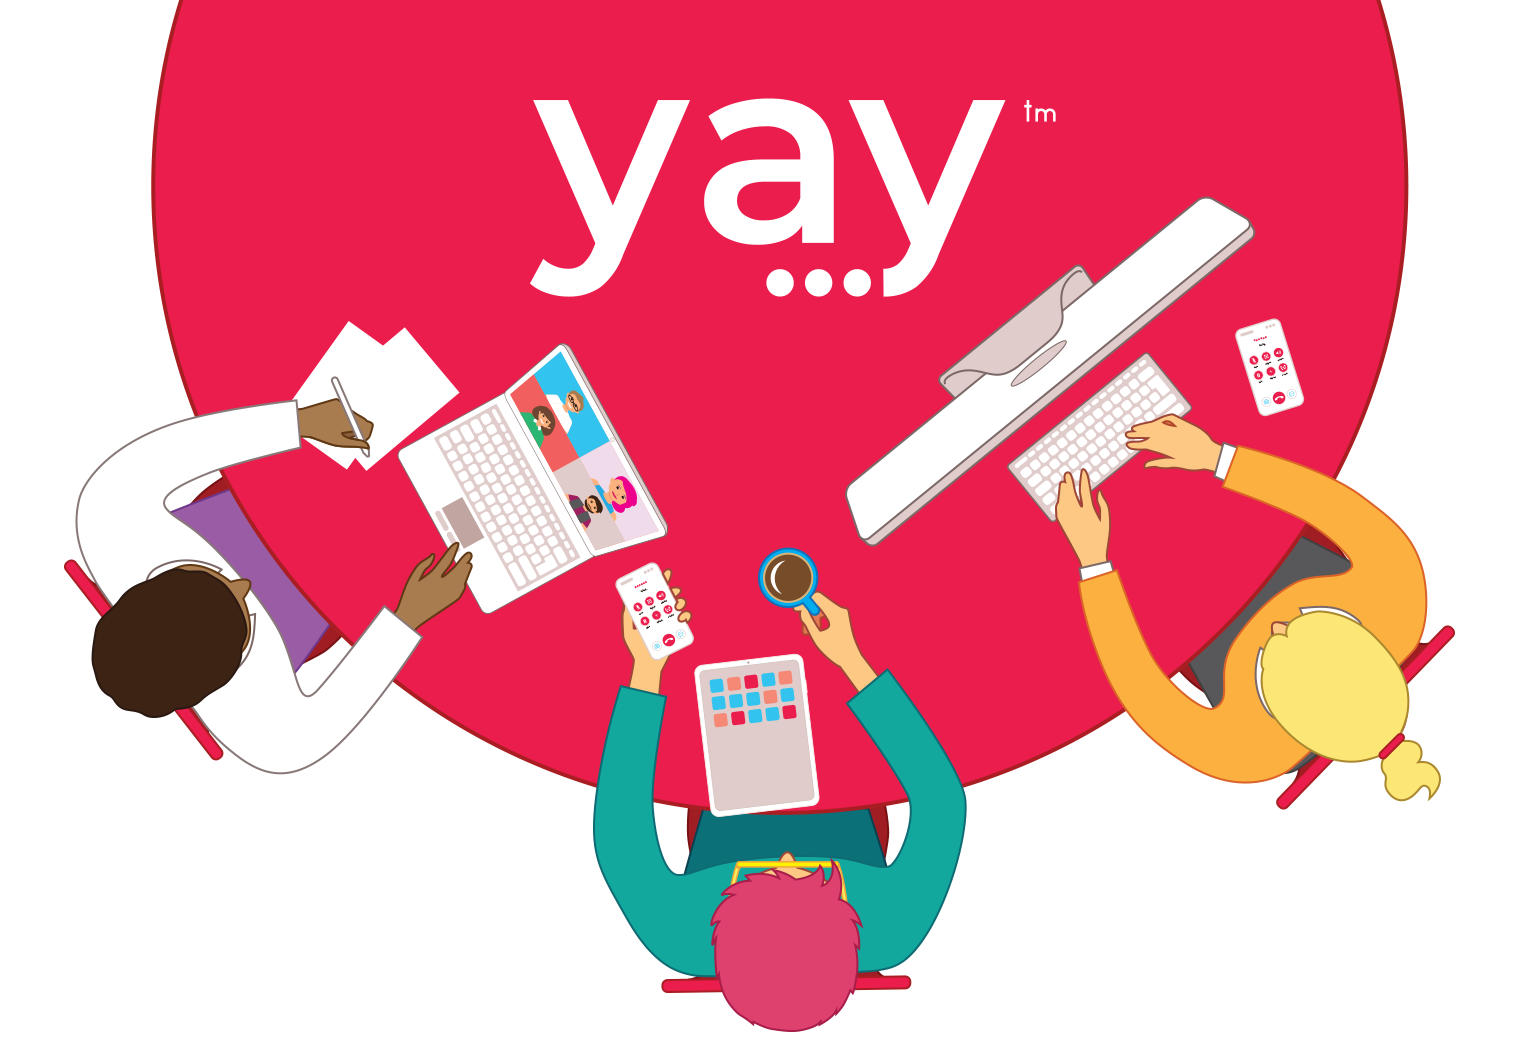 5 Star Support: An Interview With Yay.com’s Five Star Support Team